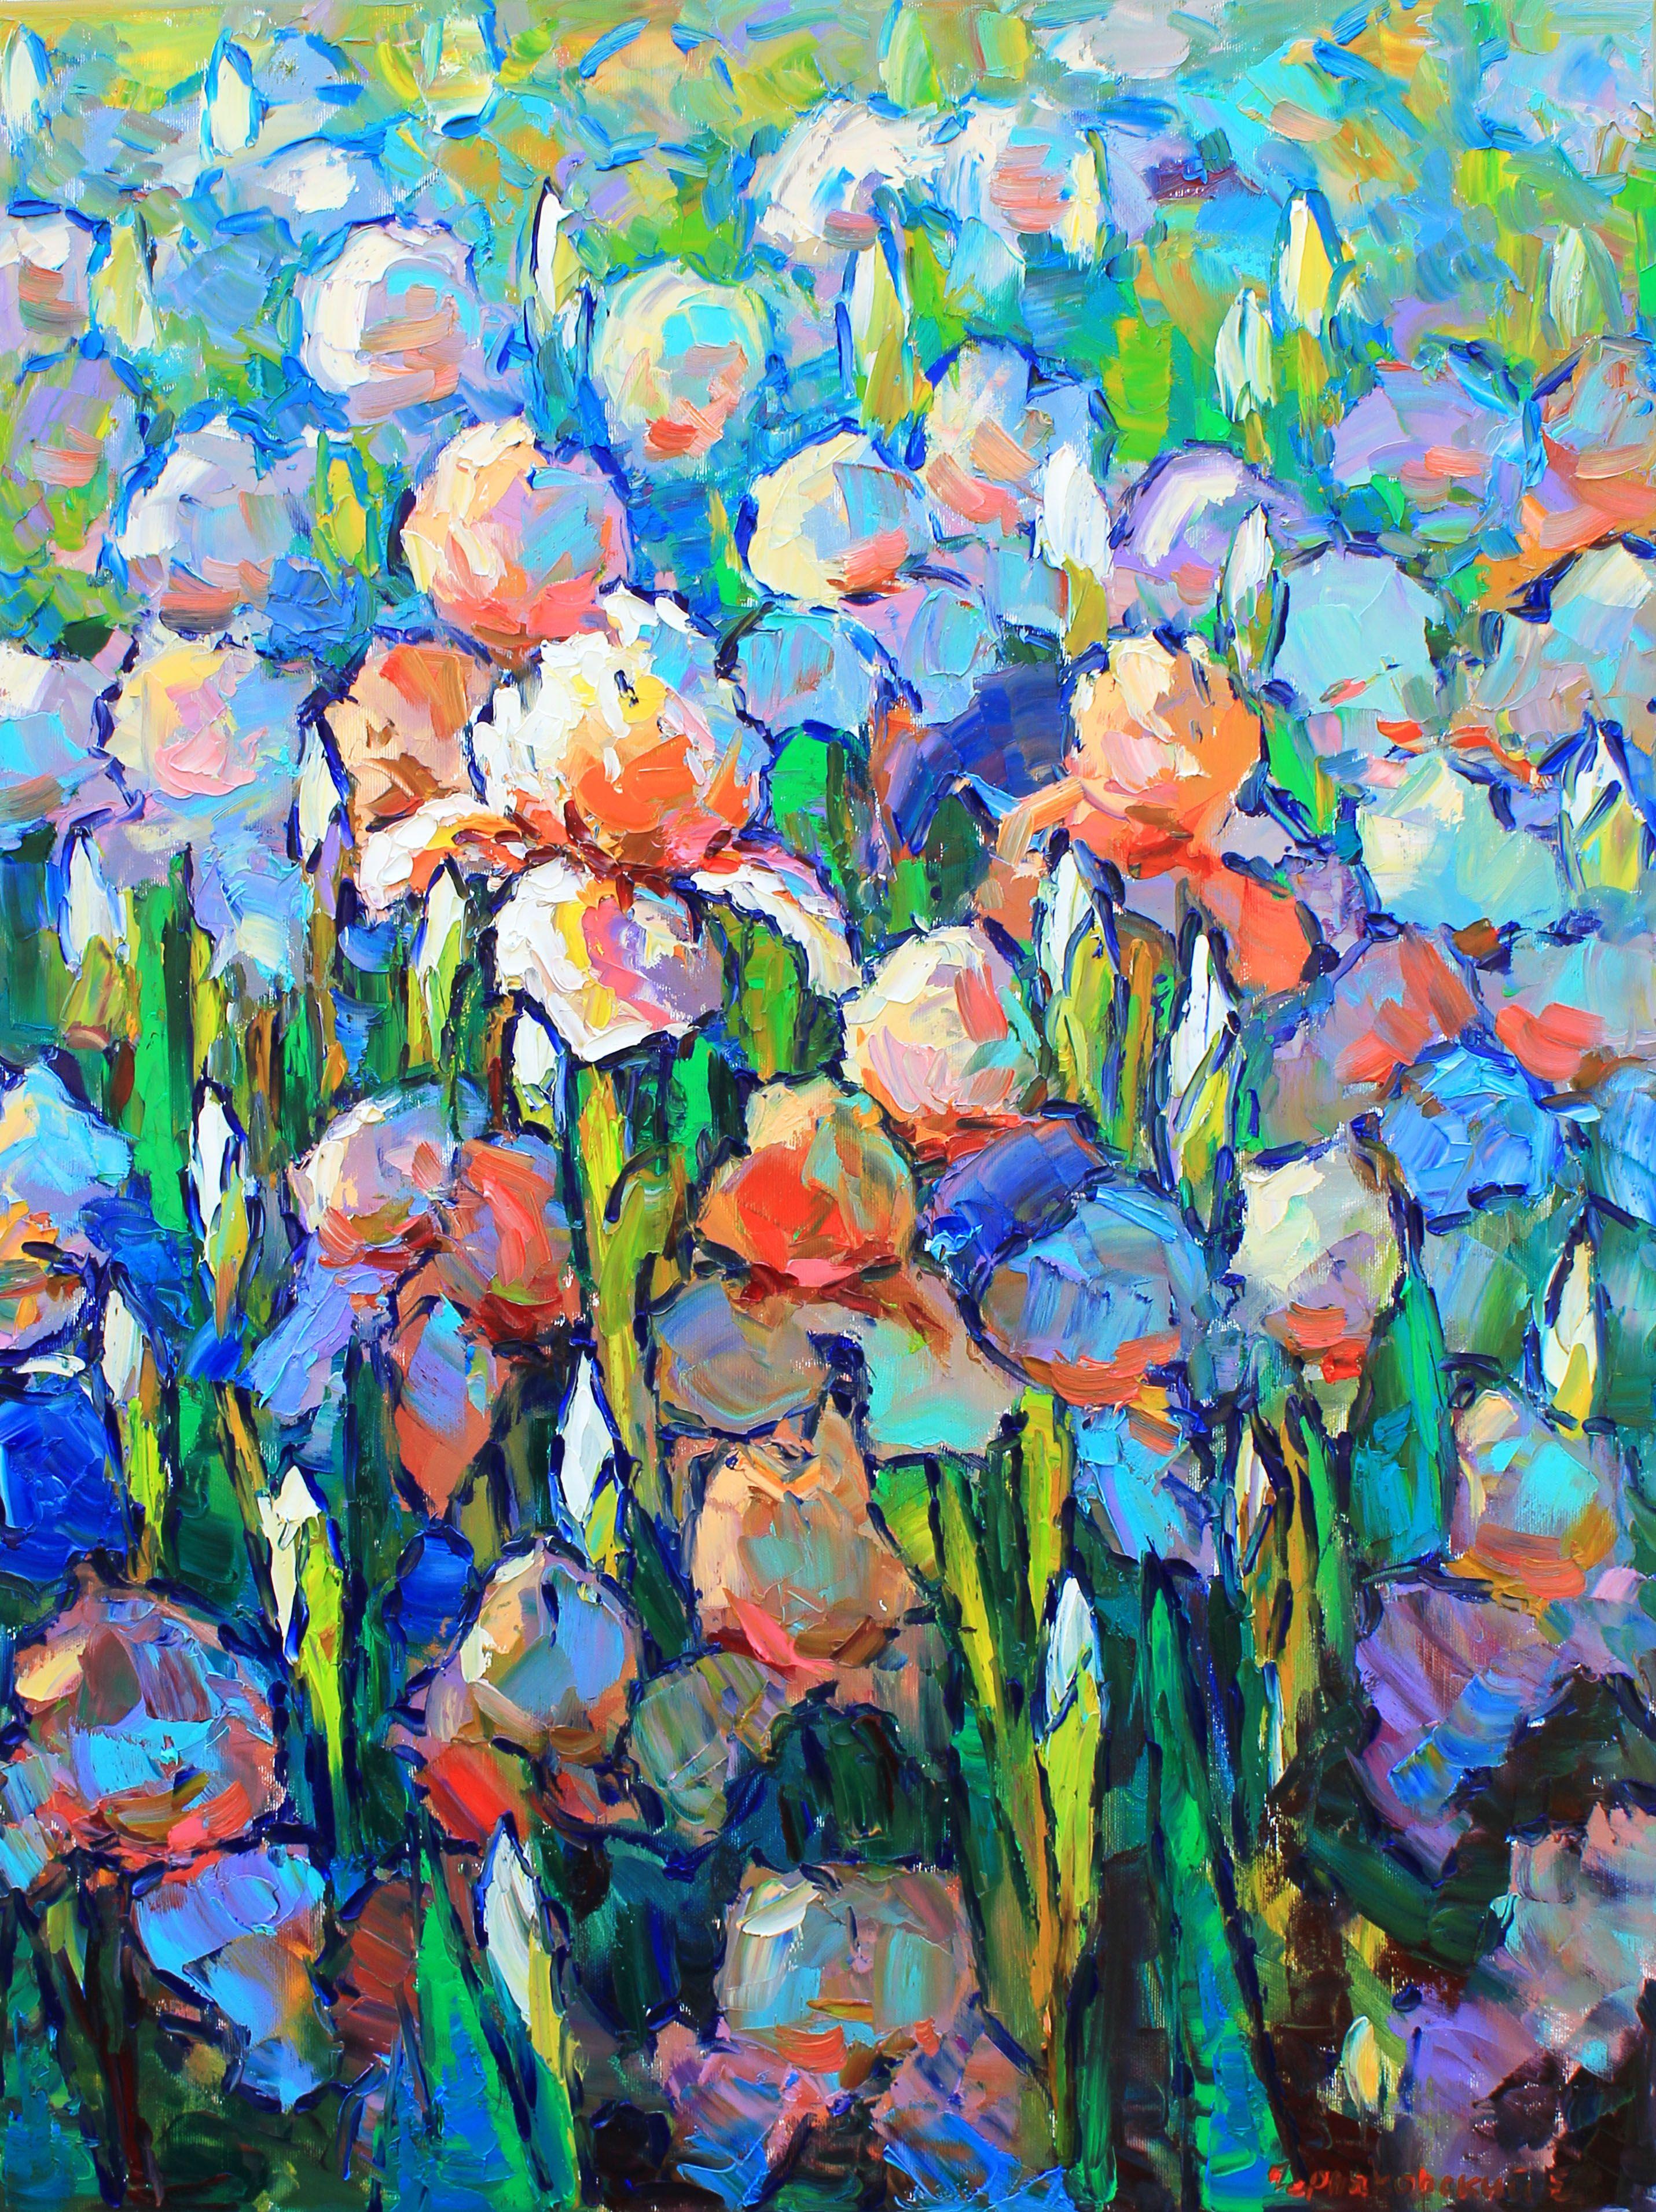 Original Oil painting by Ukrainian artist Evgeny Chernyakovsky    "Irises"  60.0 X 80.0 CM / 23.6 X 31.4 IN  HIGH QUALITY oil on canvas  Signed on the front and back  Dated 2022  Good condition  GUARANTEE OF AUTHENTICITY :: Painting :: Impressionist